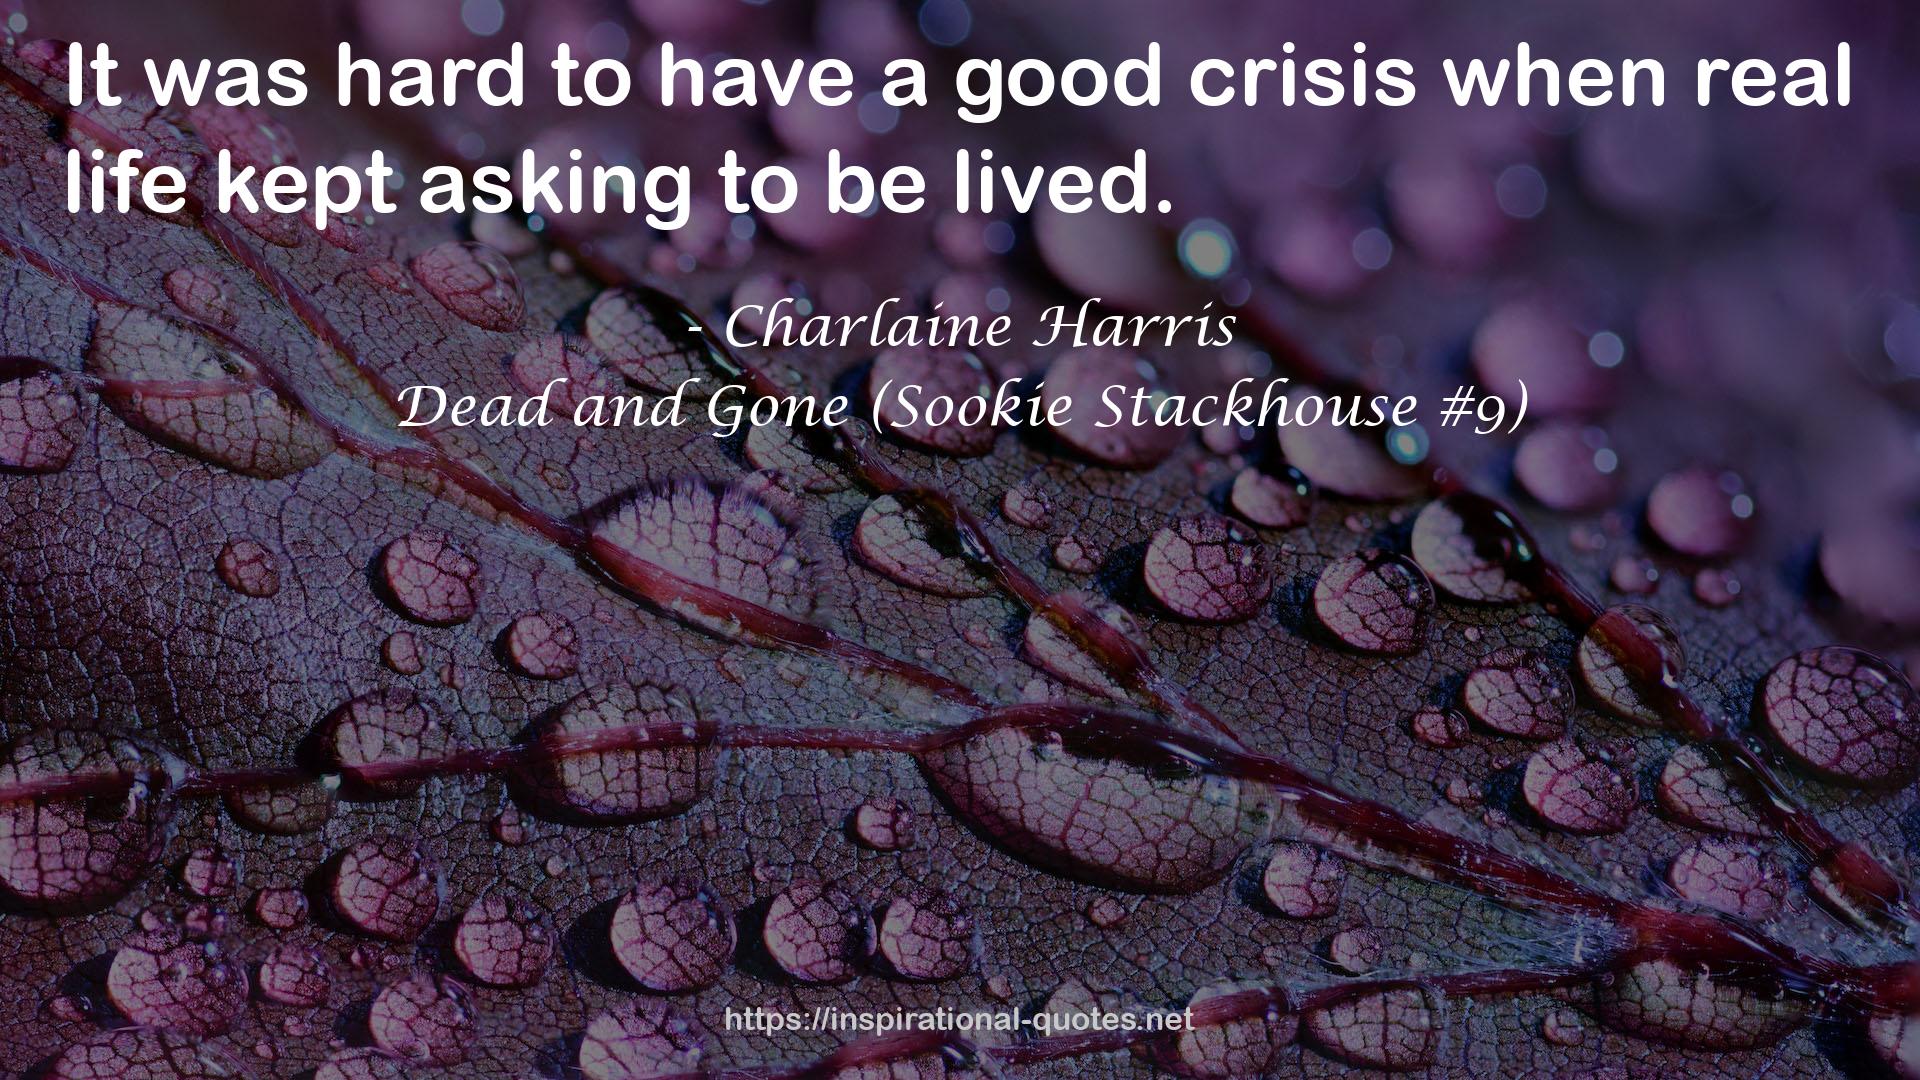 Dead and Gone (Sookie Stackhouse #9) QUOTES